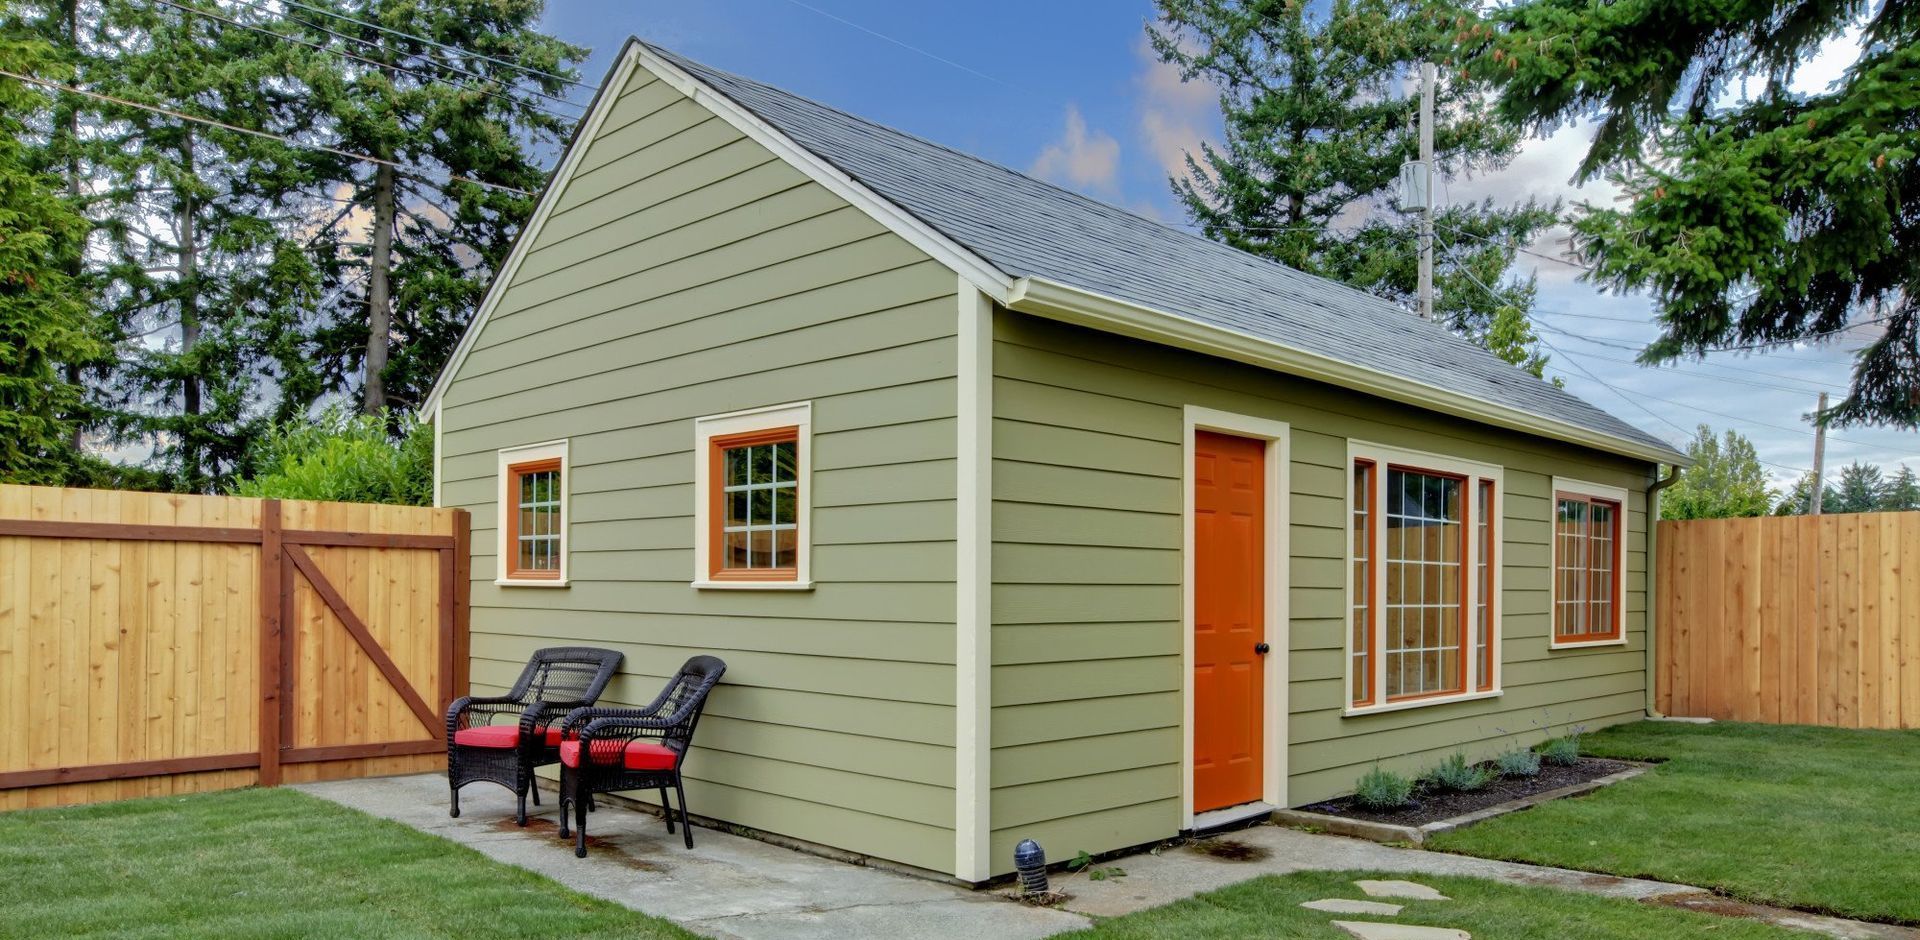 Differnt types of ADUs - Accessory Dwelling Units